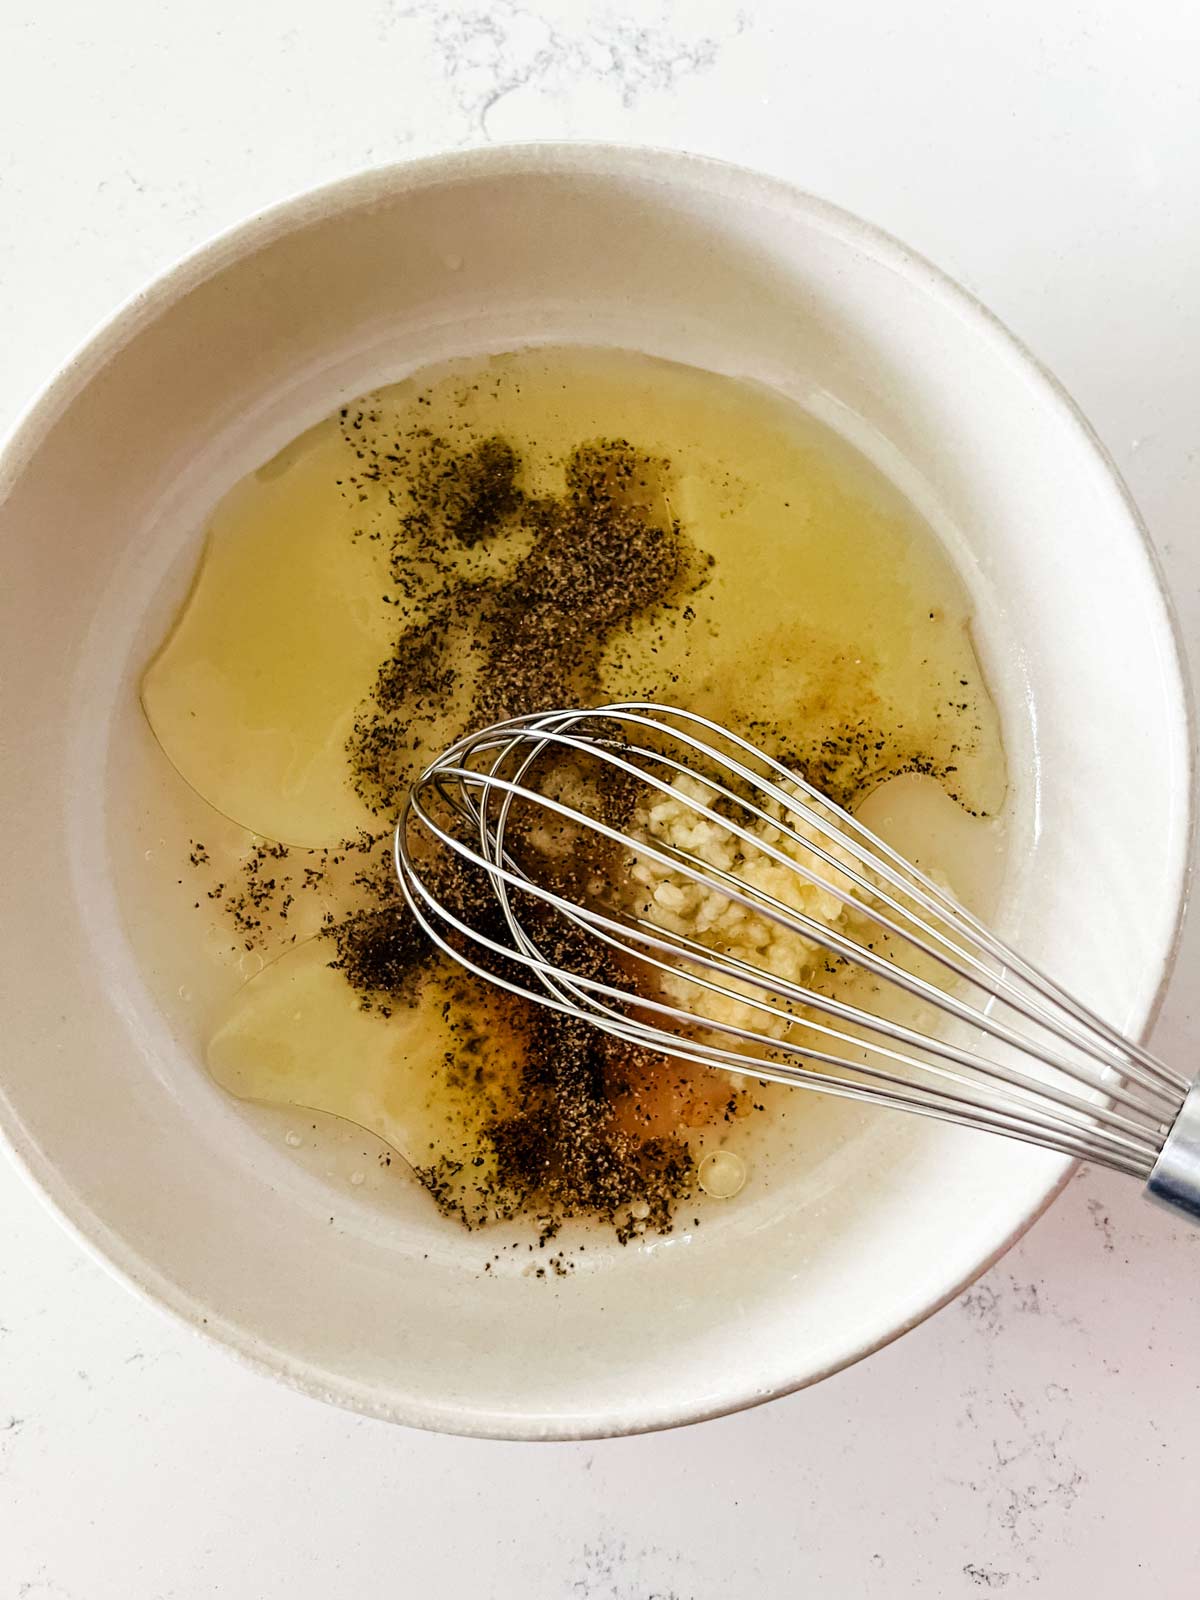 Avocado oil, lemon juice, garlic, salt, and pepper being whisked together in a bowl.